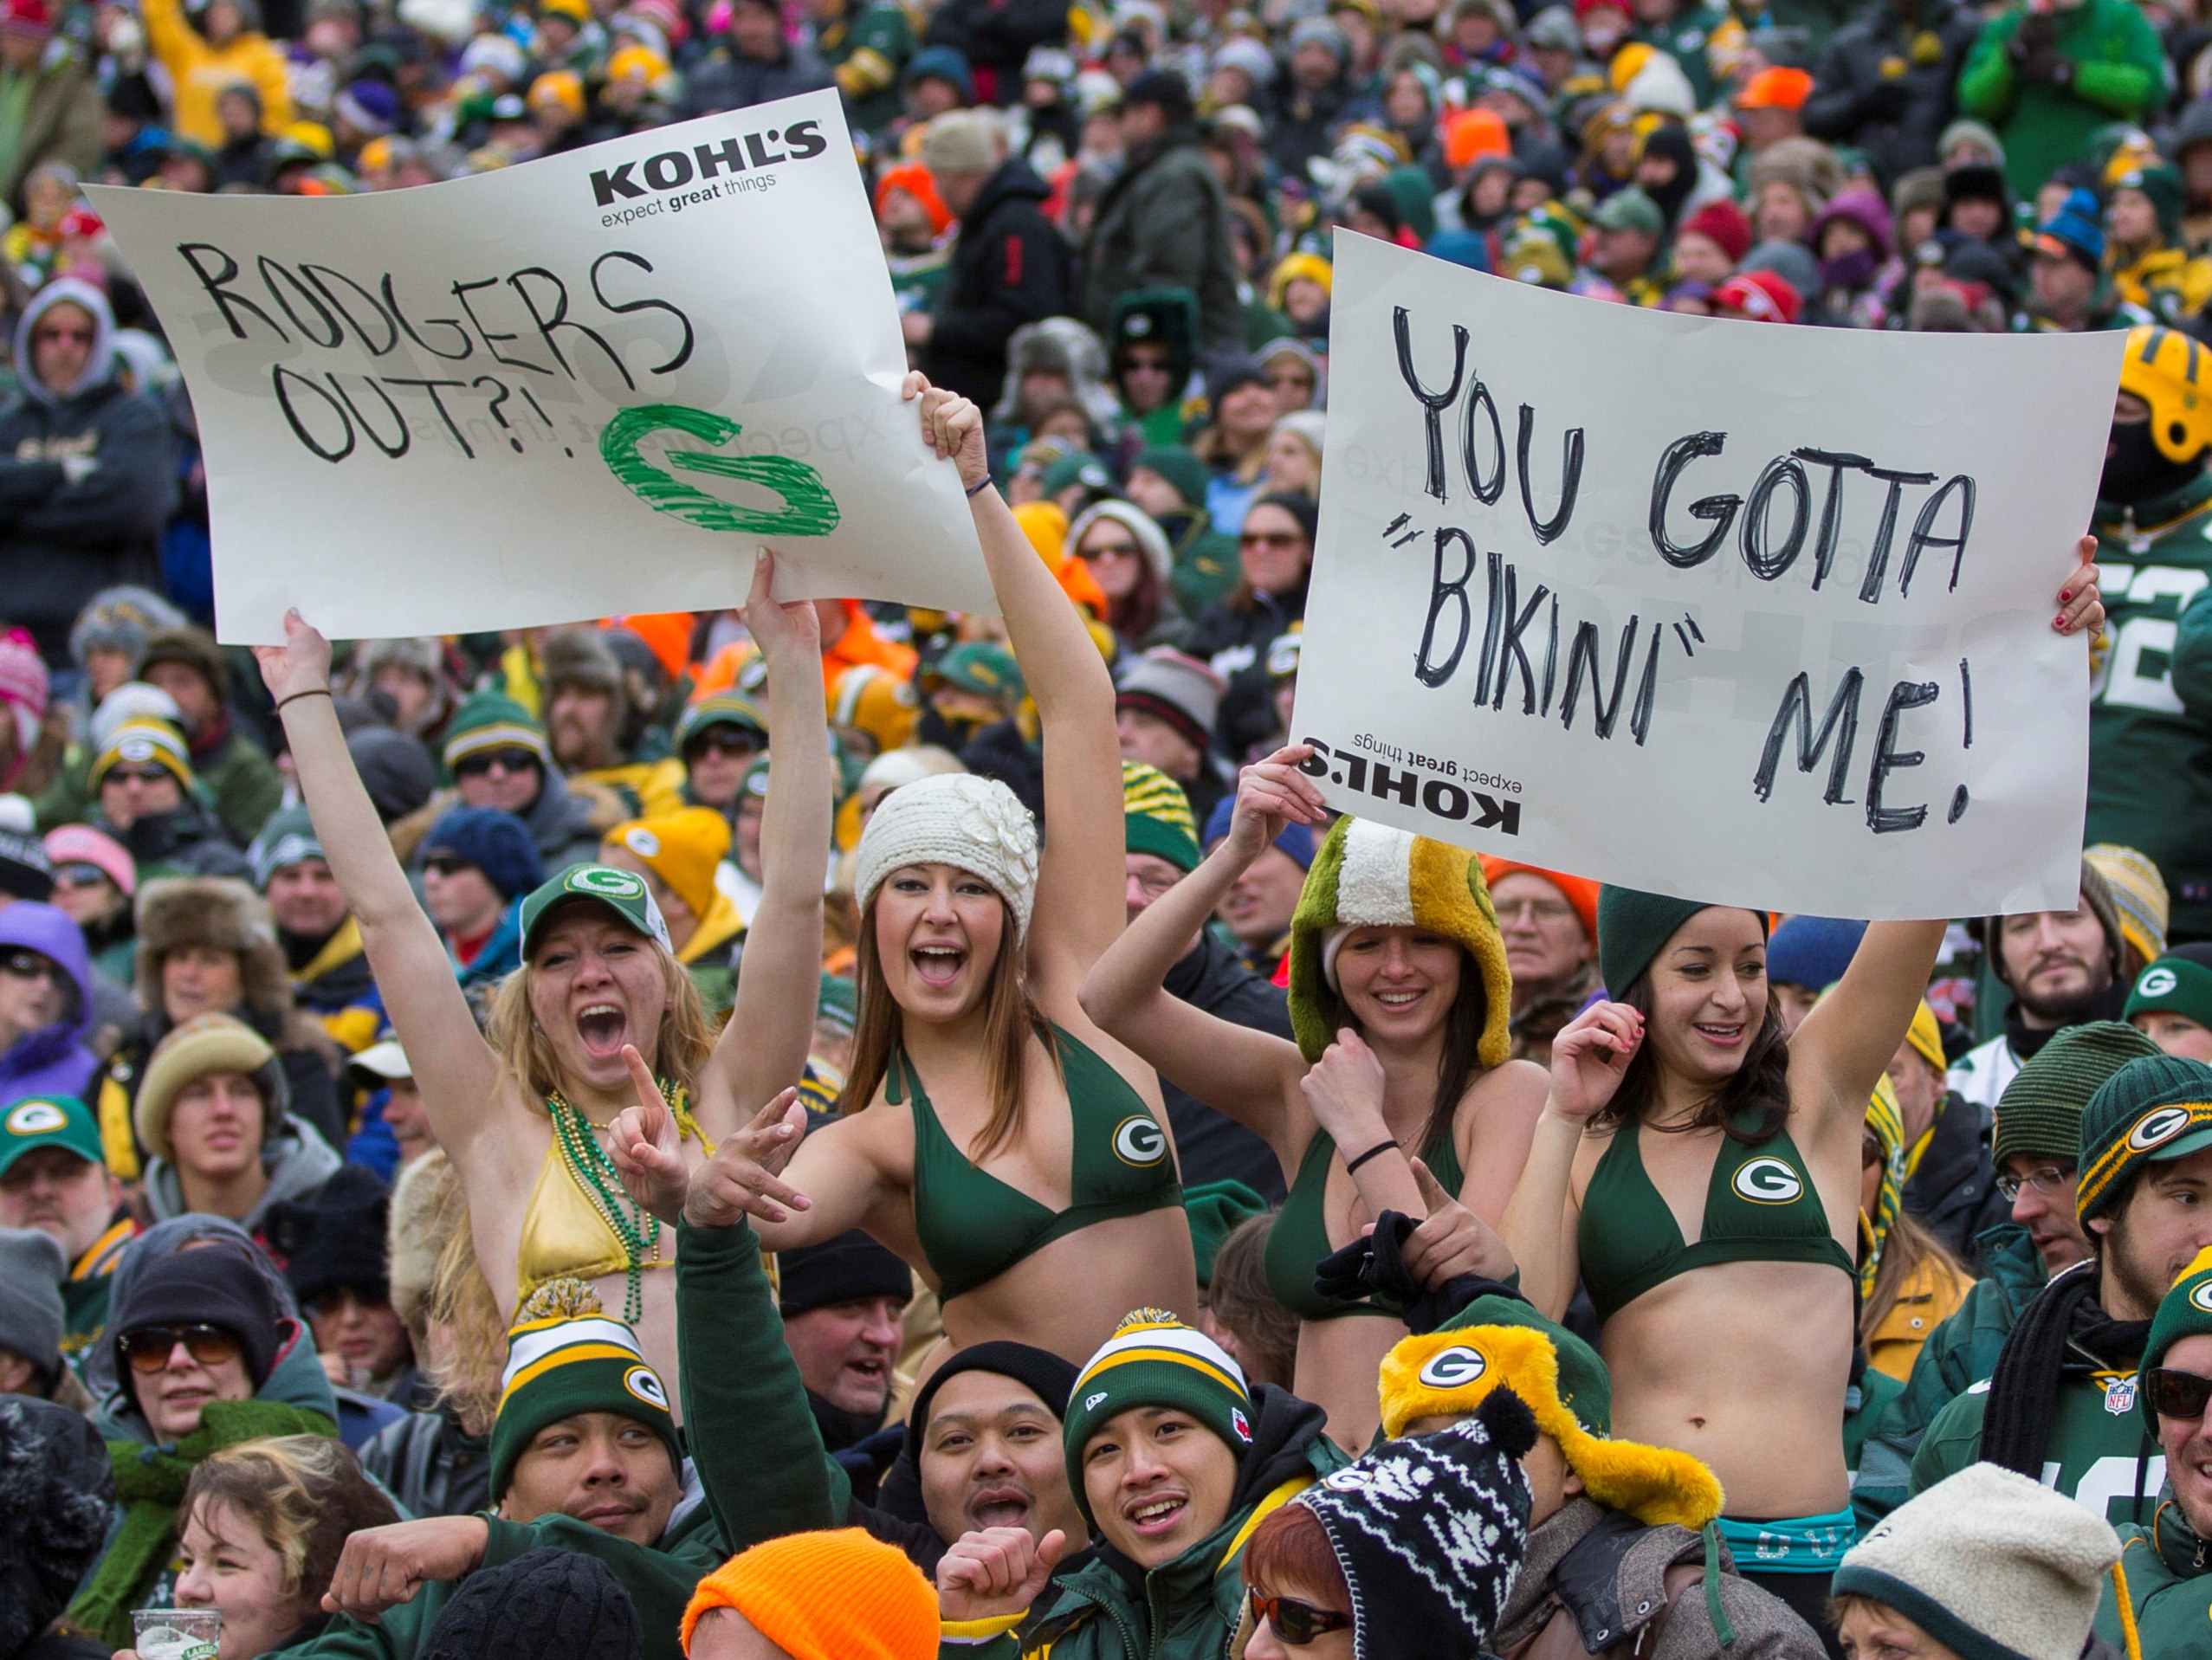 packers backers dating site